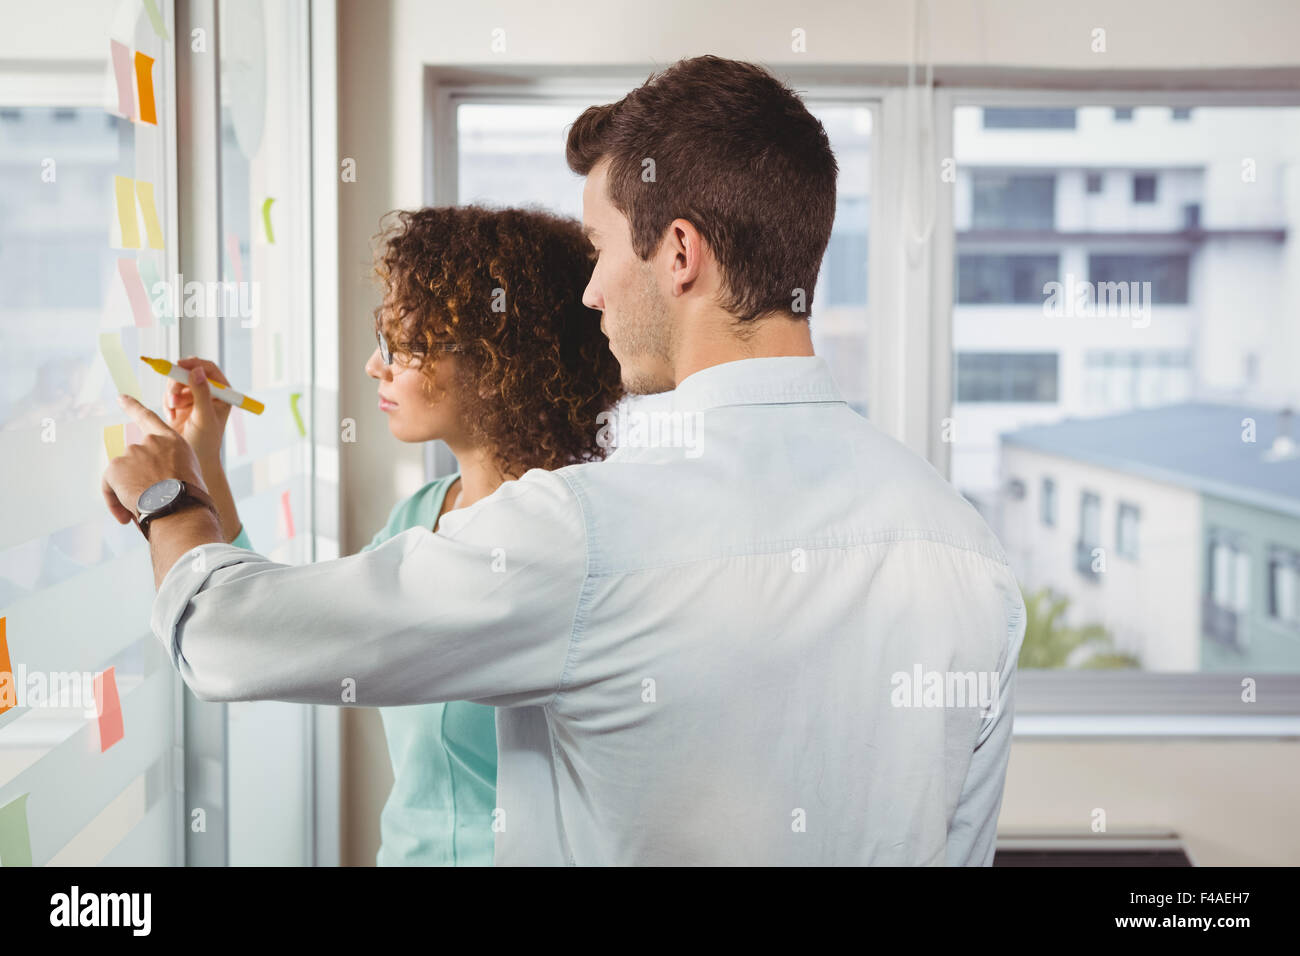 Business people writing and pointing on adhesive note Stock Photo